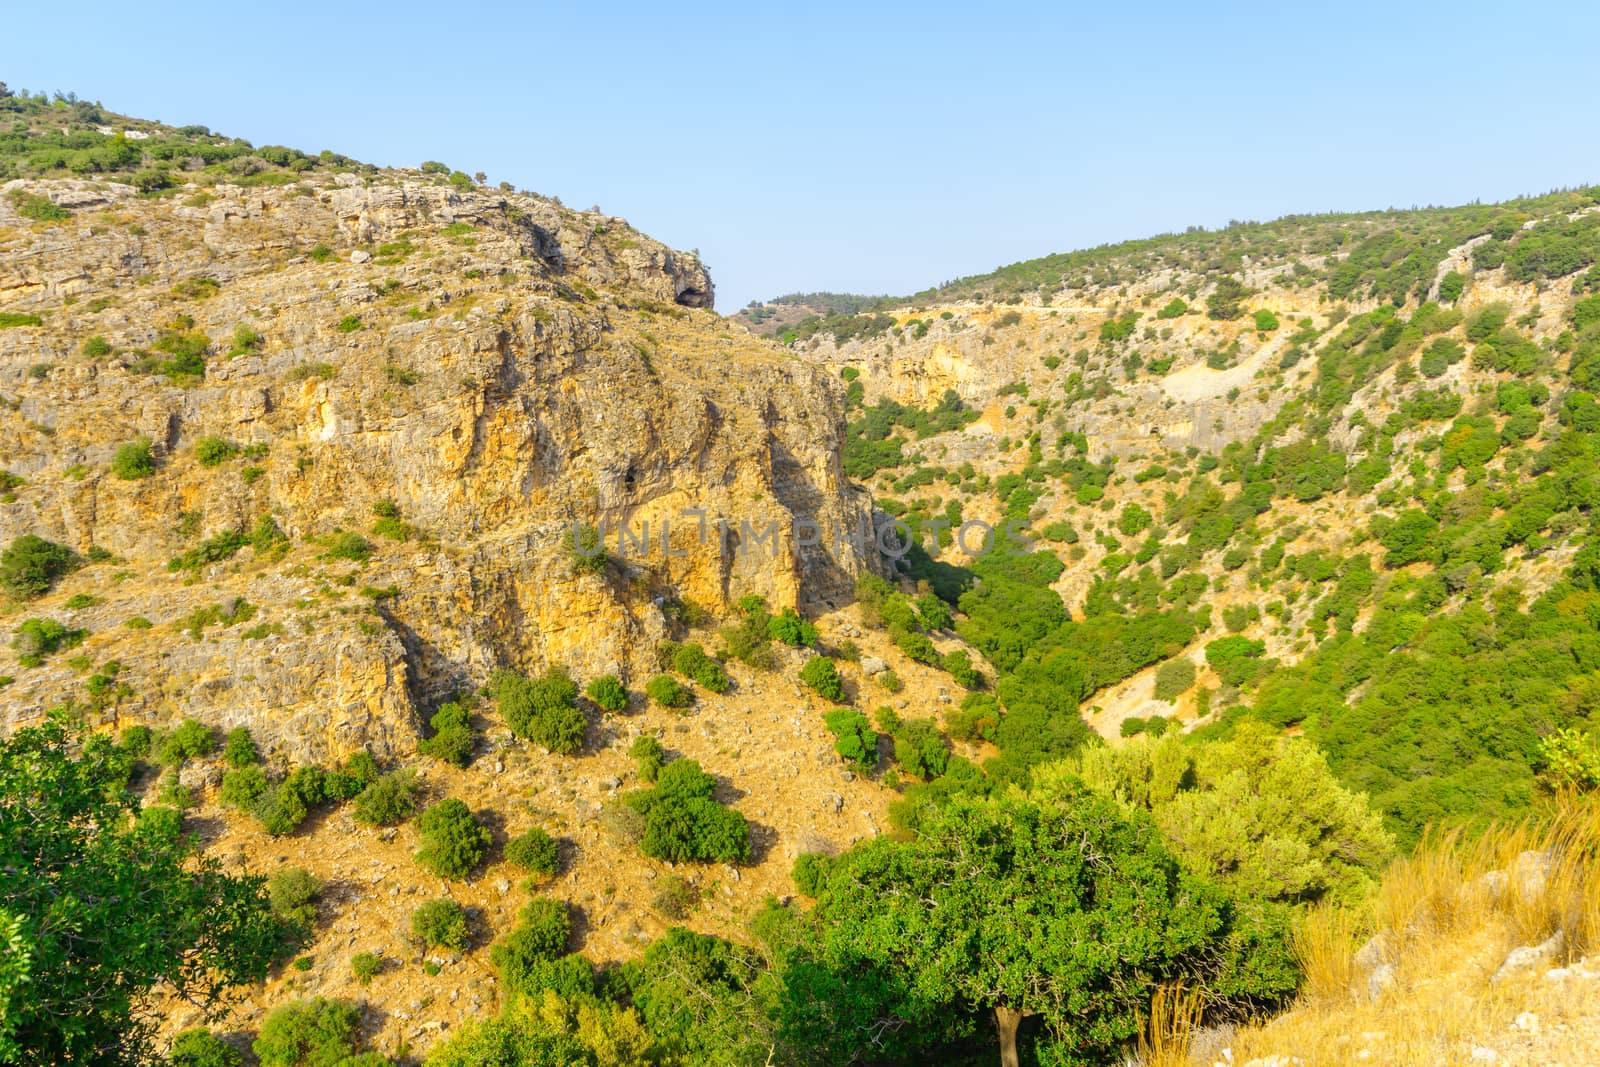 View of landscape of cliffs and valley in the Western Galilee, Northern Israel